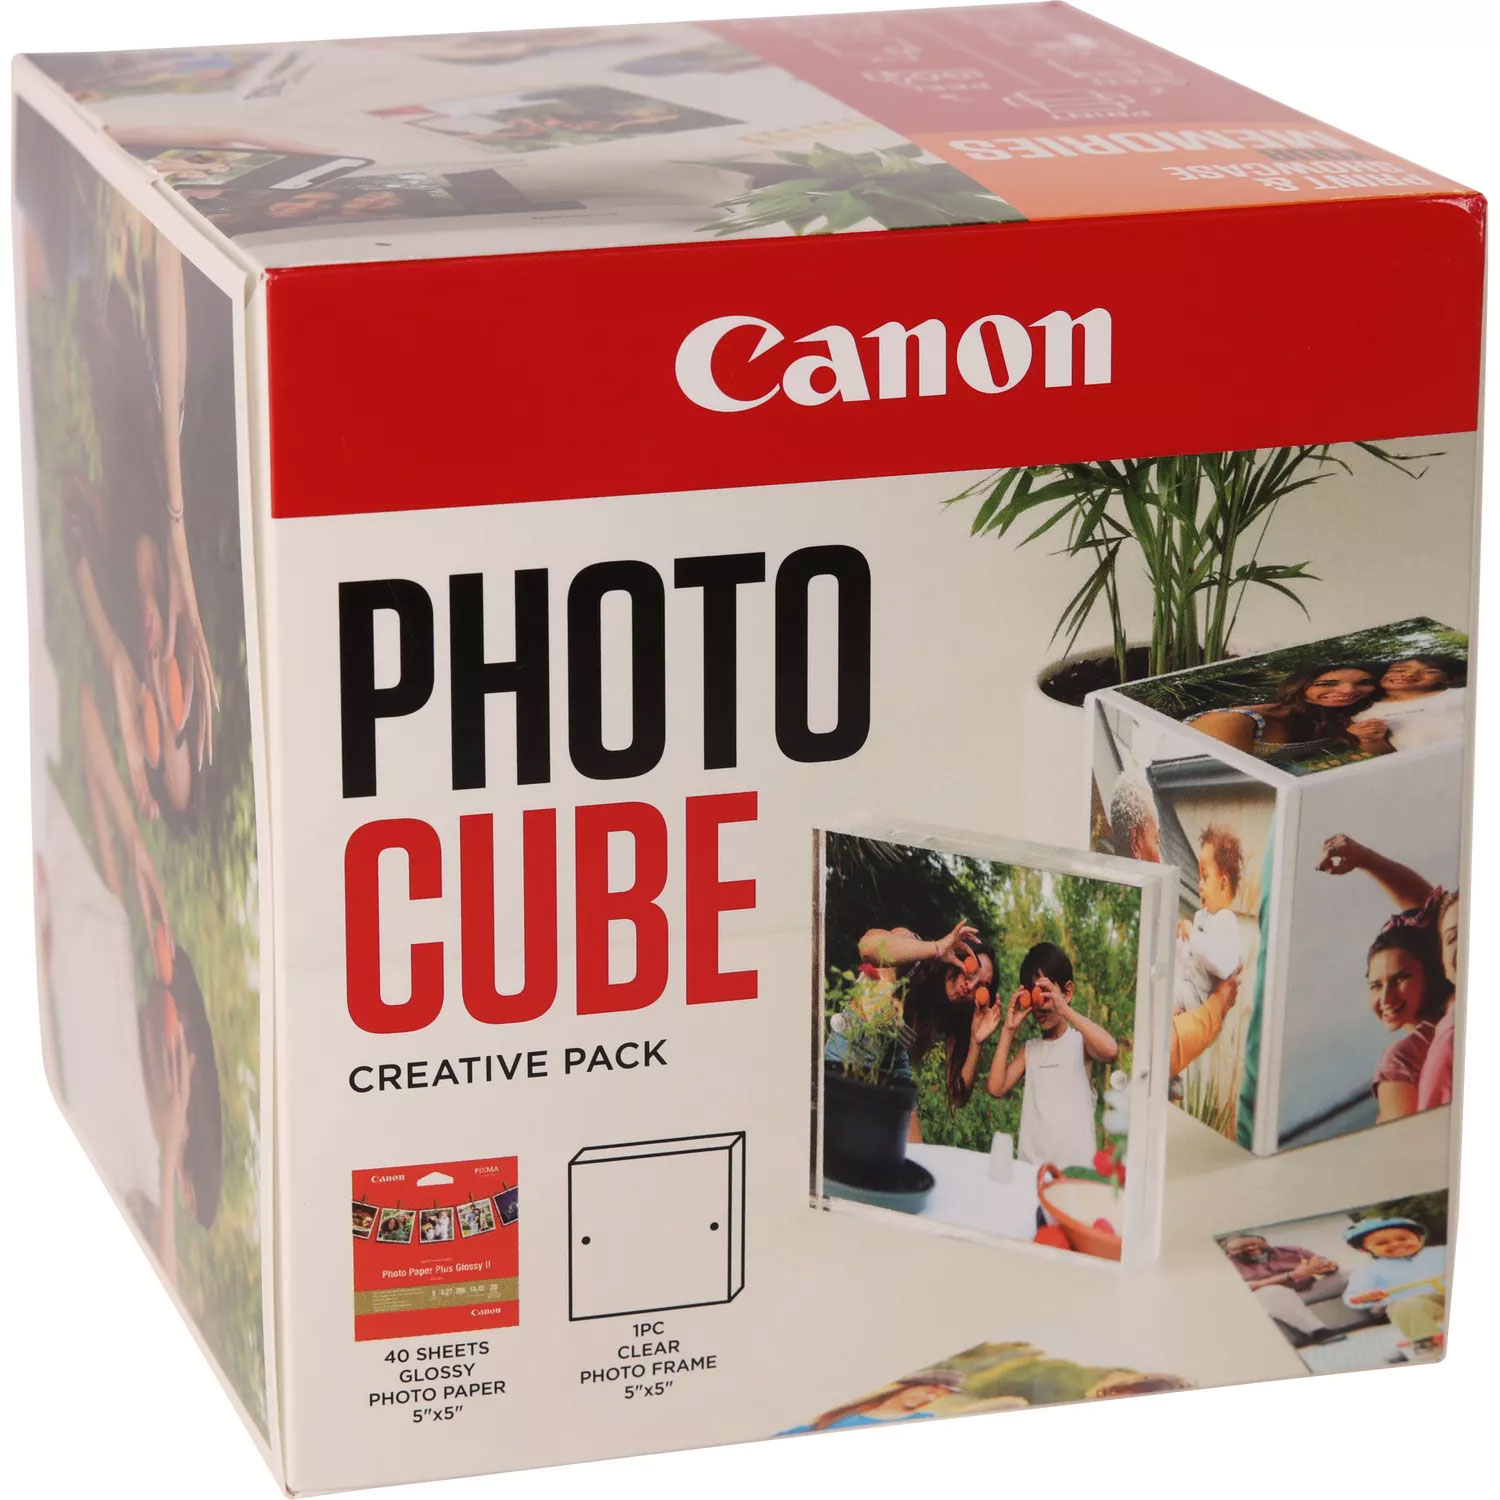 Original Canon Photo Cube and Frame + PP-201 5x5? Photo Paper Plus Glossy II (40 sheets) Pack Orange (2311B077)